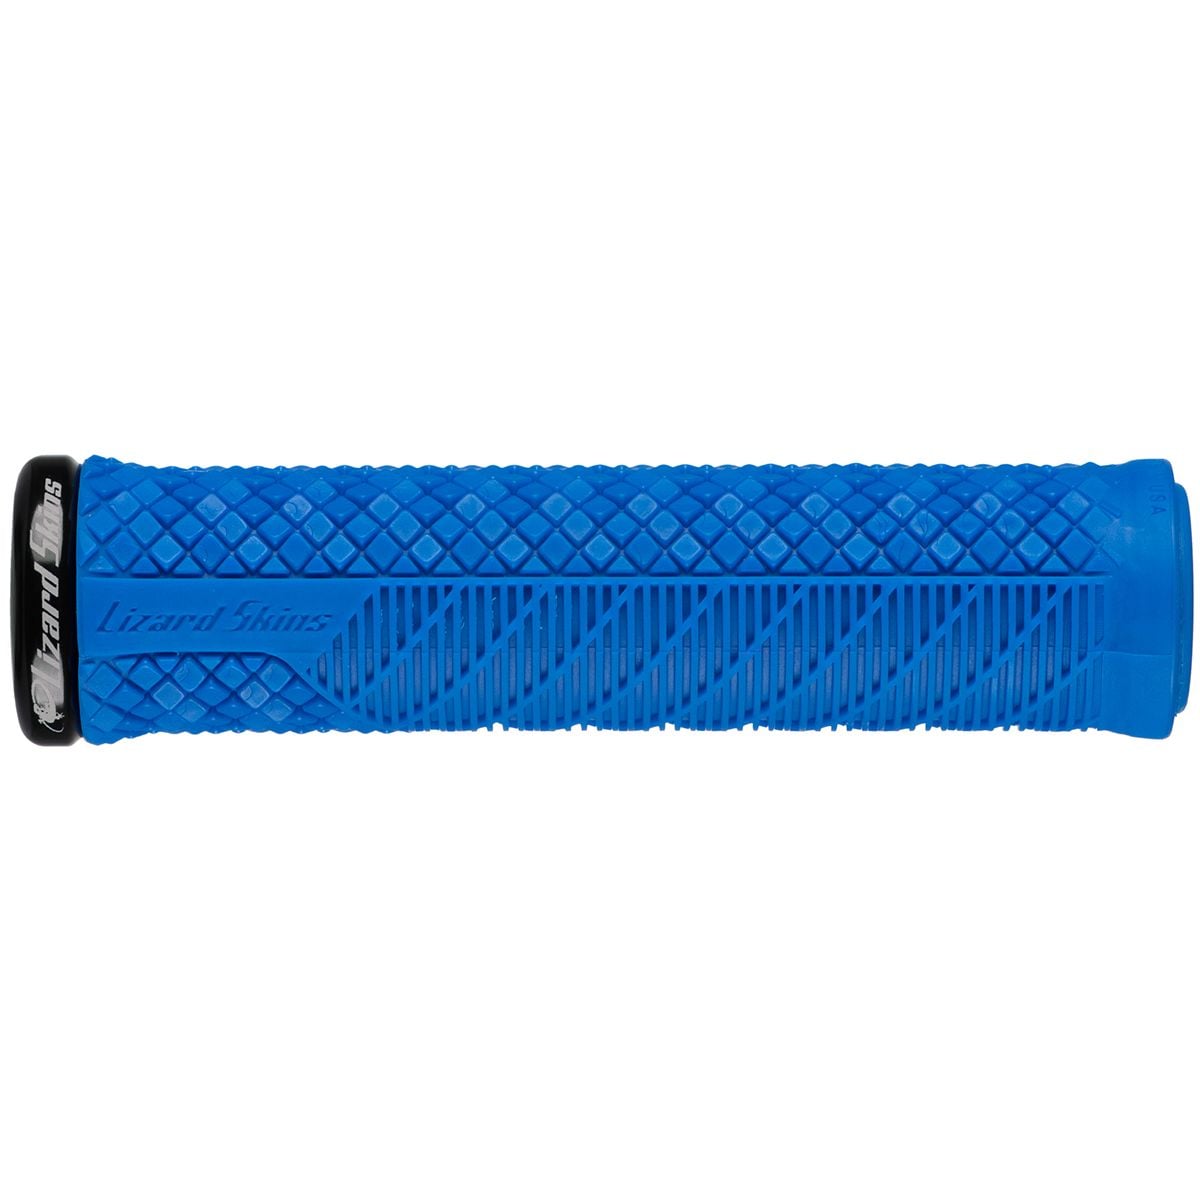 Lizard Skins Charger Evo Lock-On Grips Electric Blue, One Size